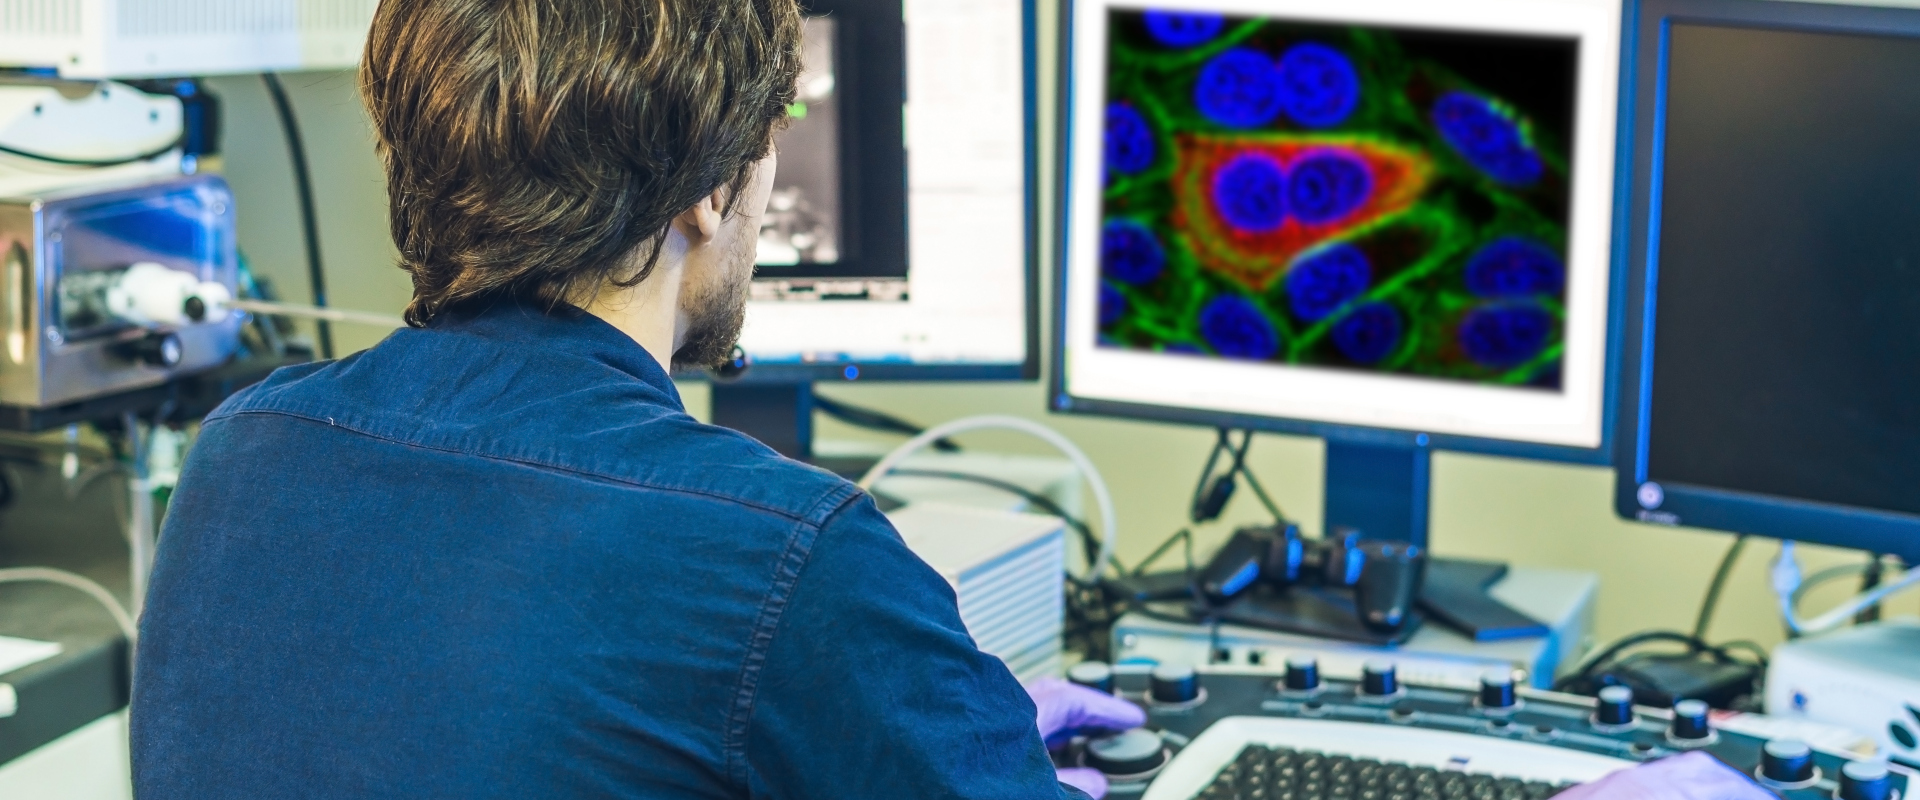 Our high content screening facility provides precise imaging, cell segmentation, and accurate data analysis for your research